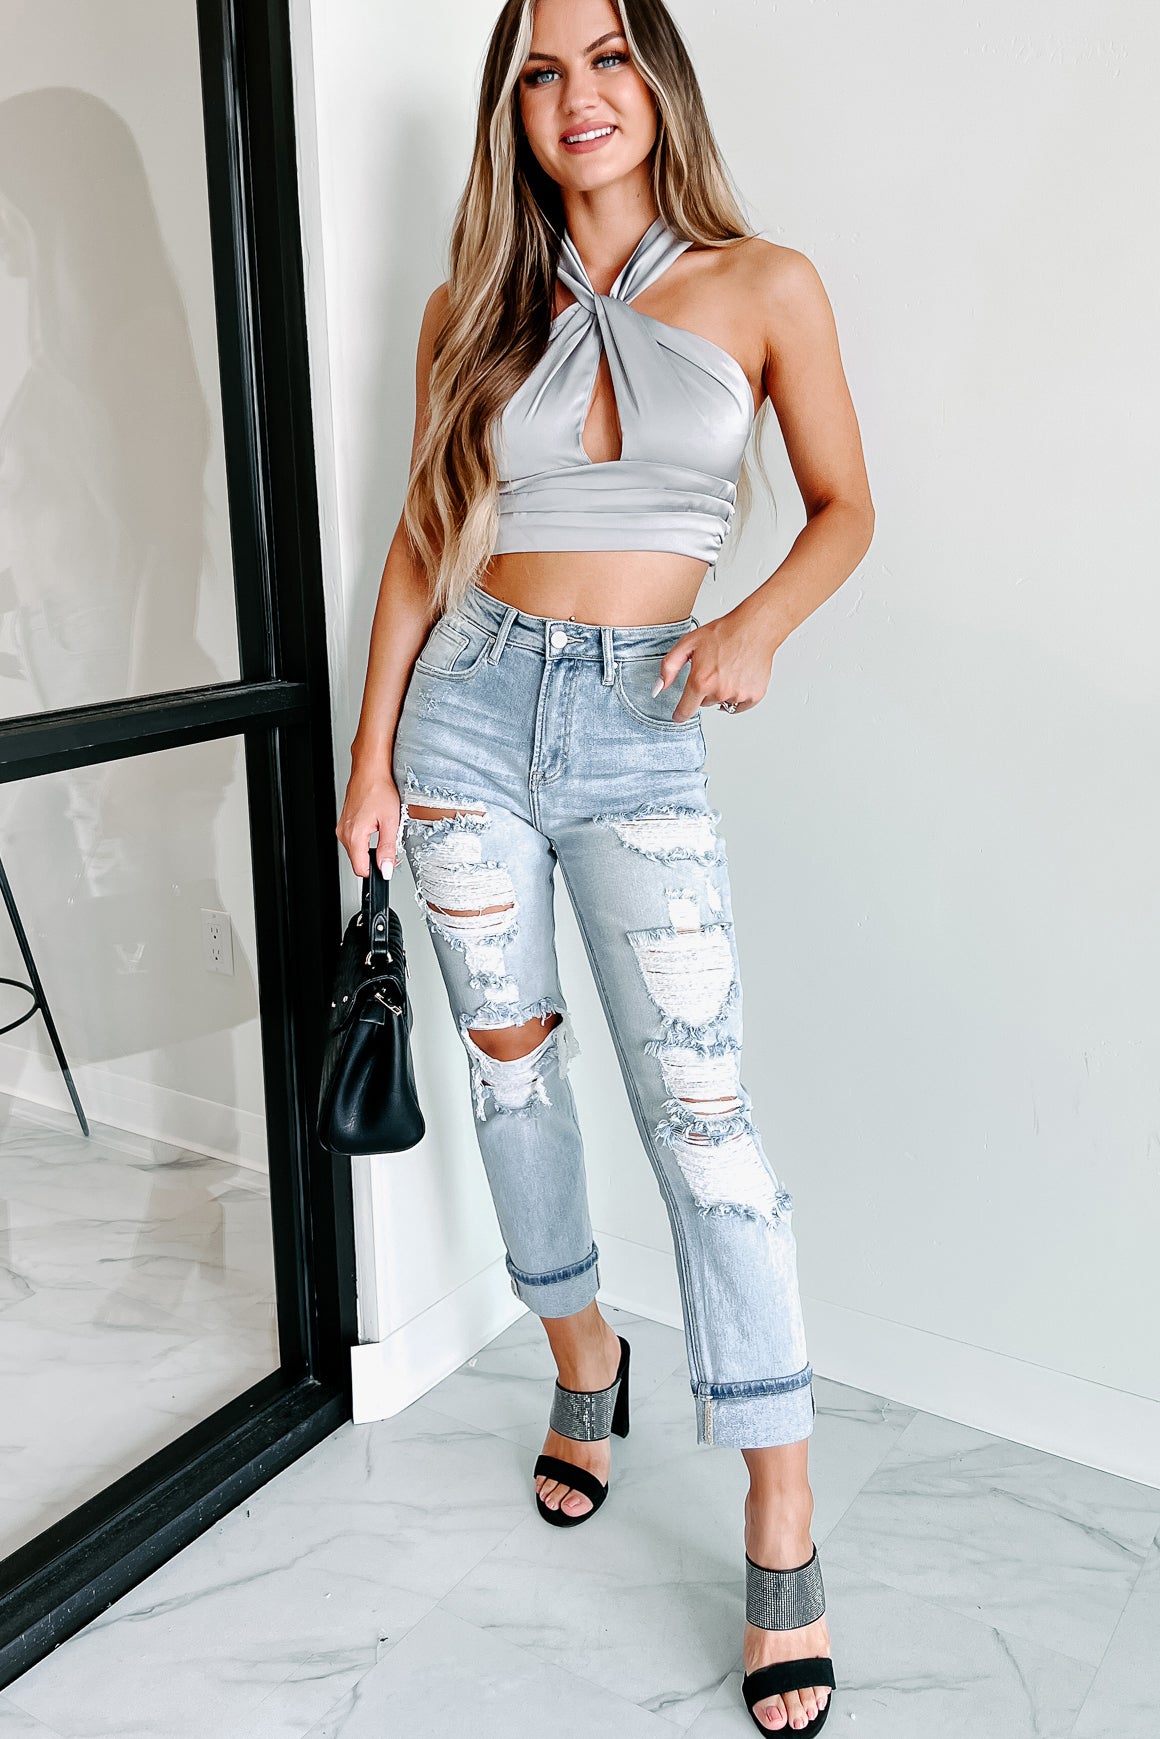 Thinking Of Our Place Satin Halter Neck Crop Top (Grey) - NanaMacs